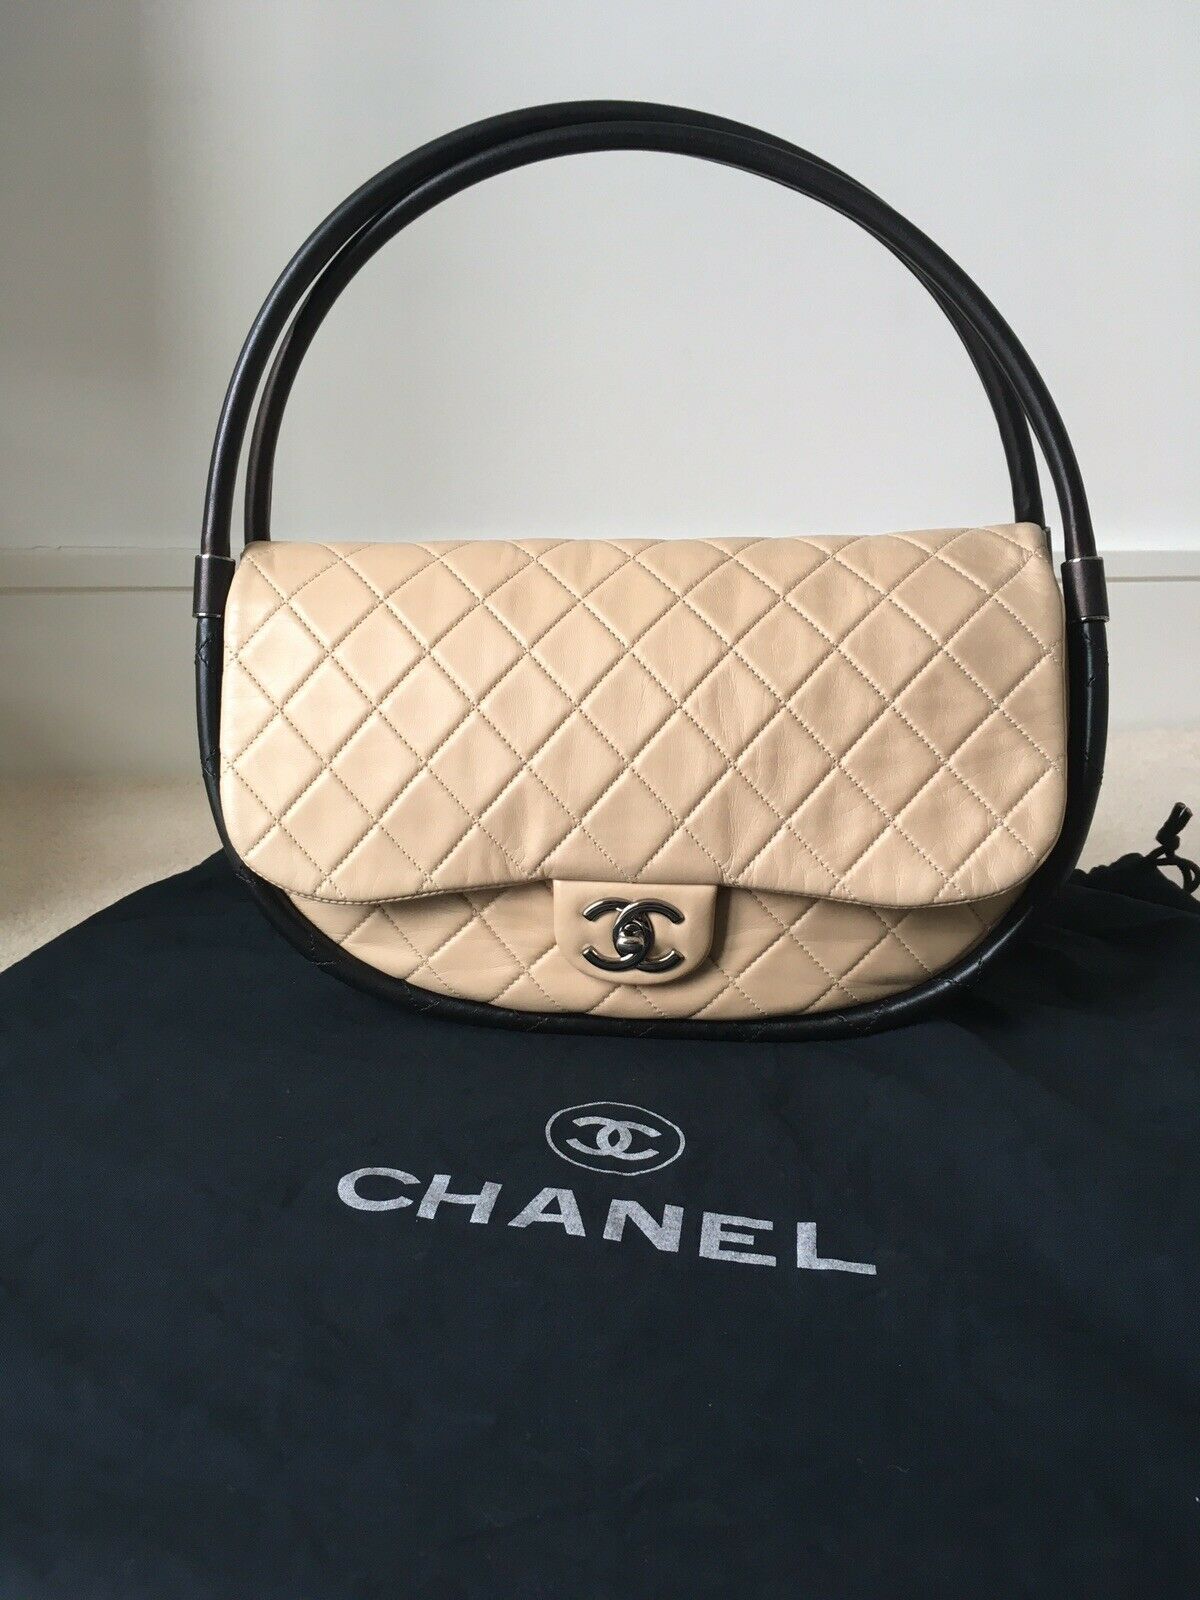 Chanel using Pricing to surge its demand levels. You can too…